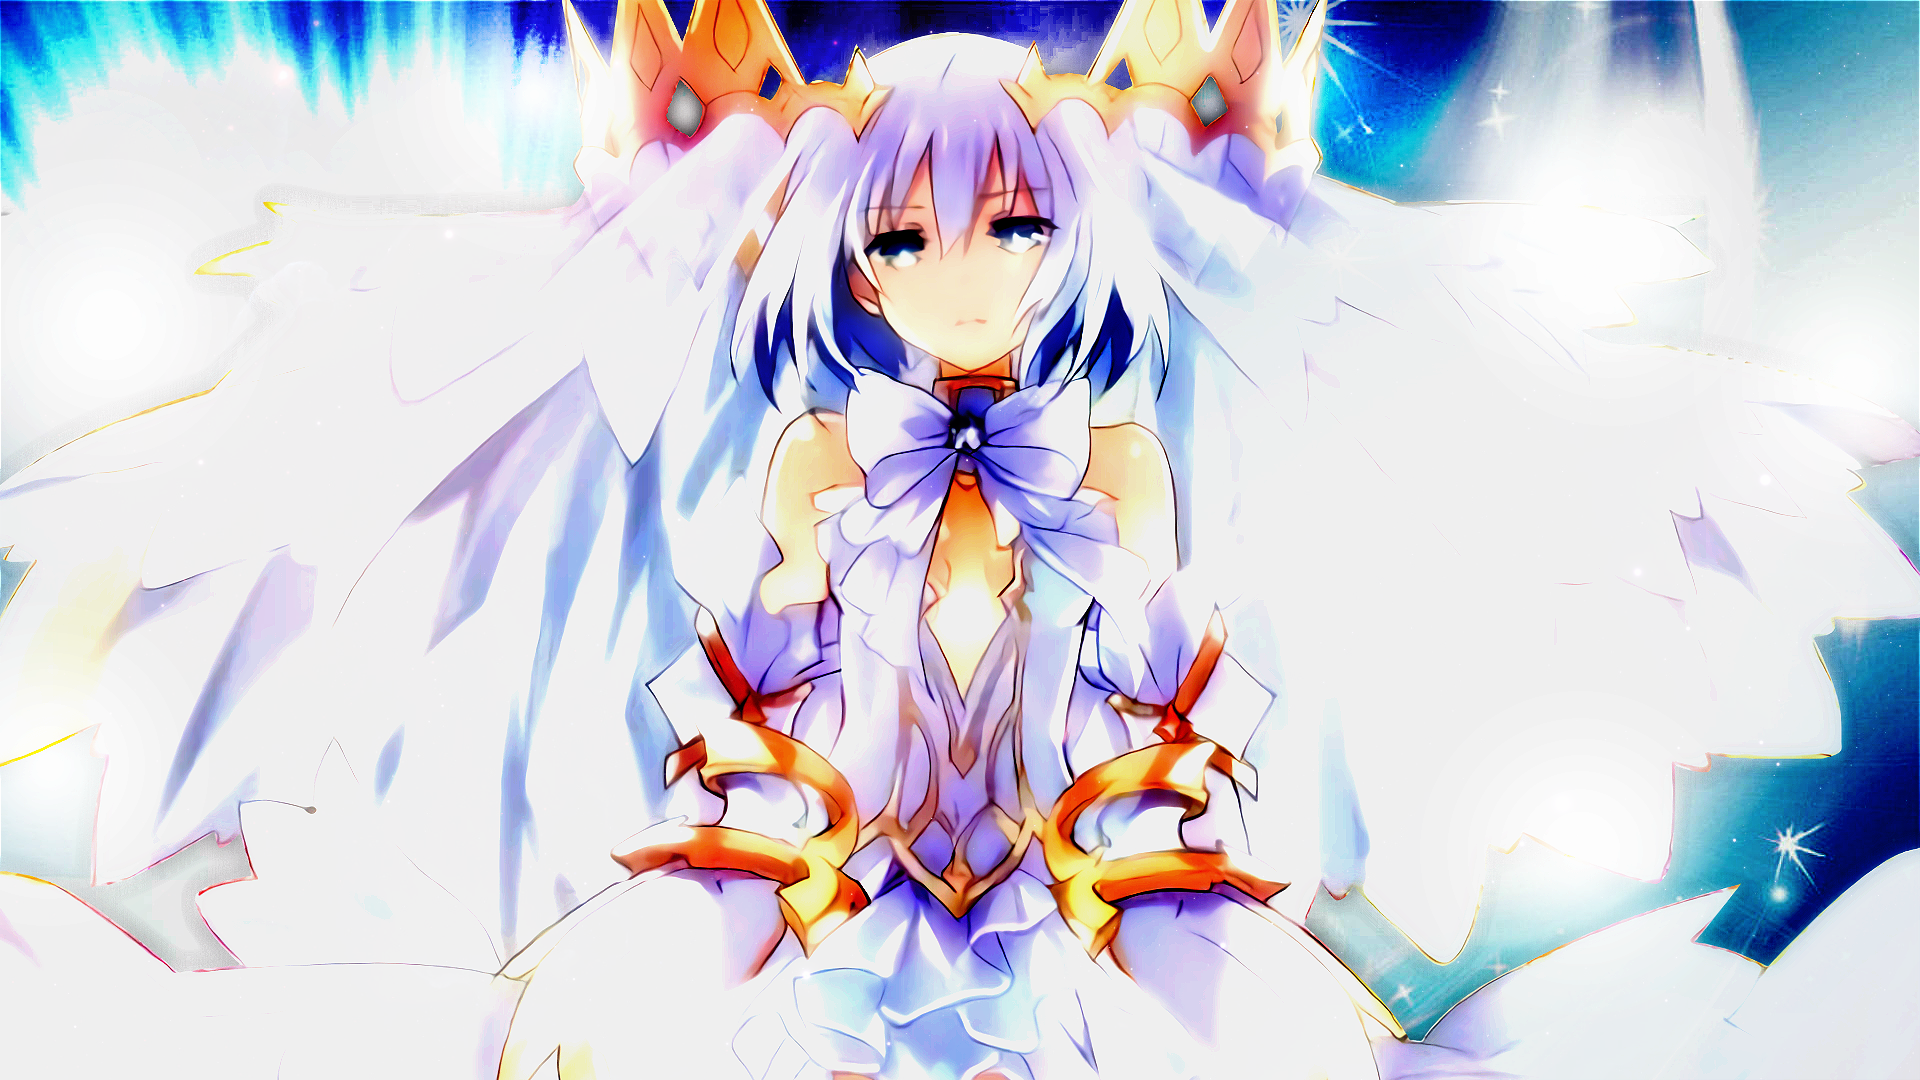 93 Date A Live Wallpapers On Wallpapersafari Images, Photos, Reviews